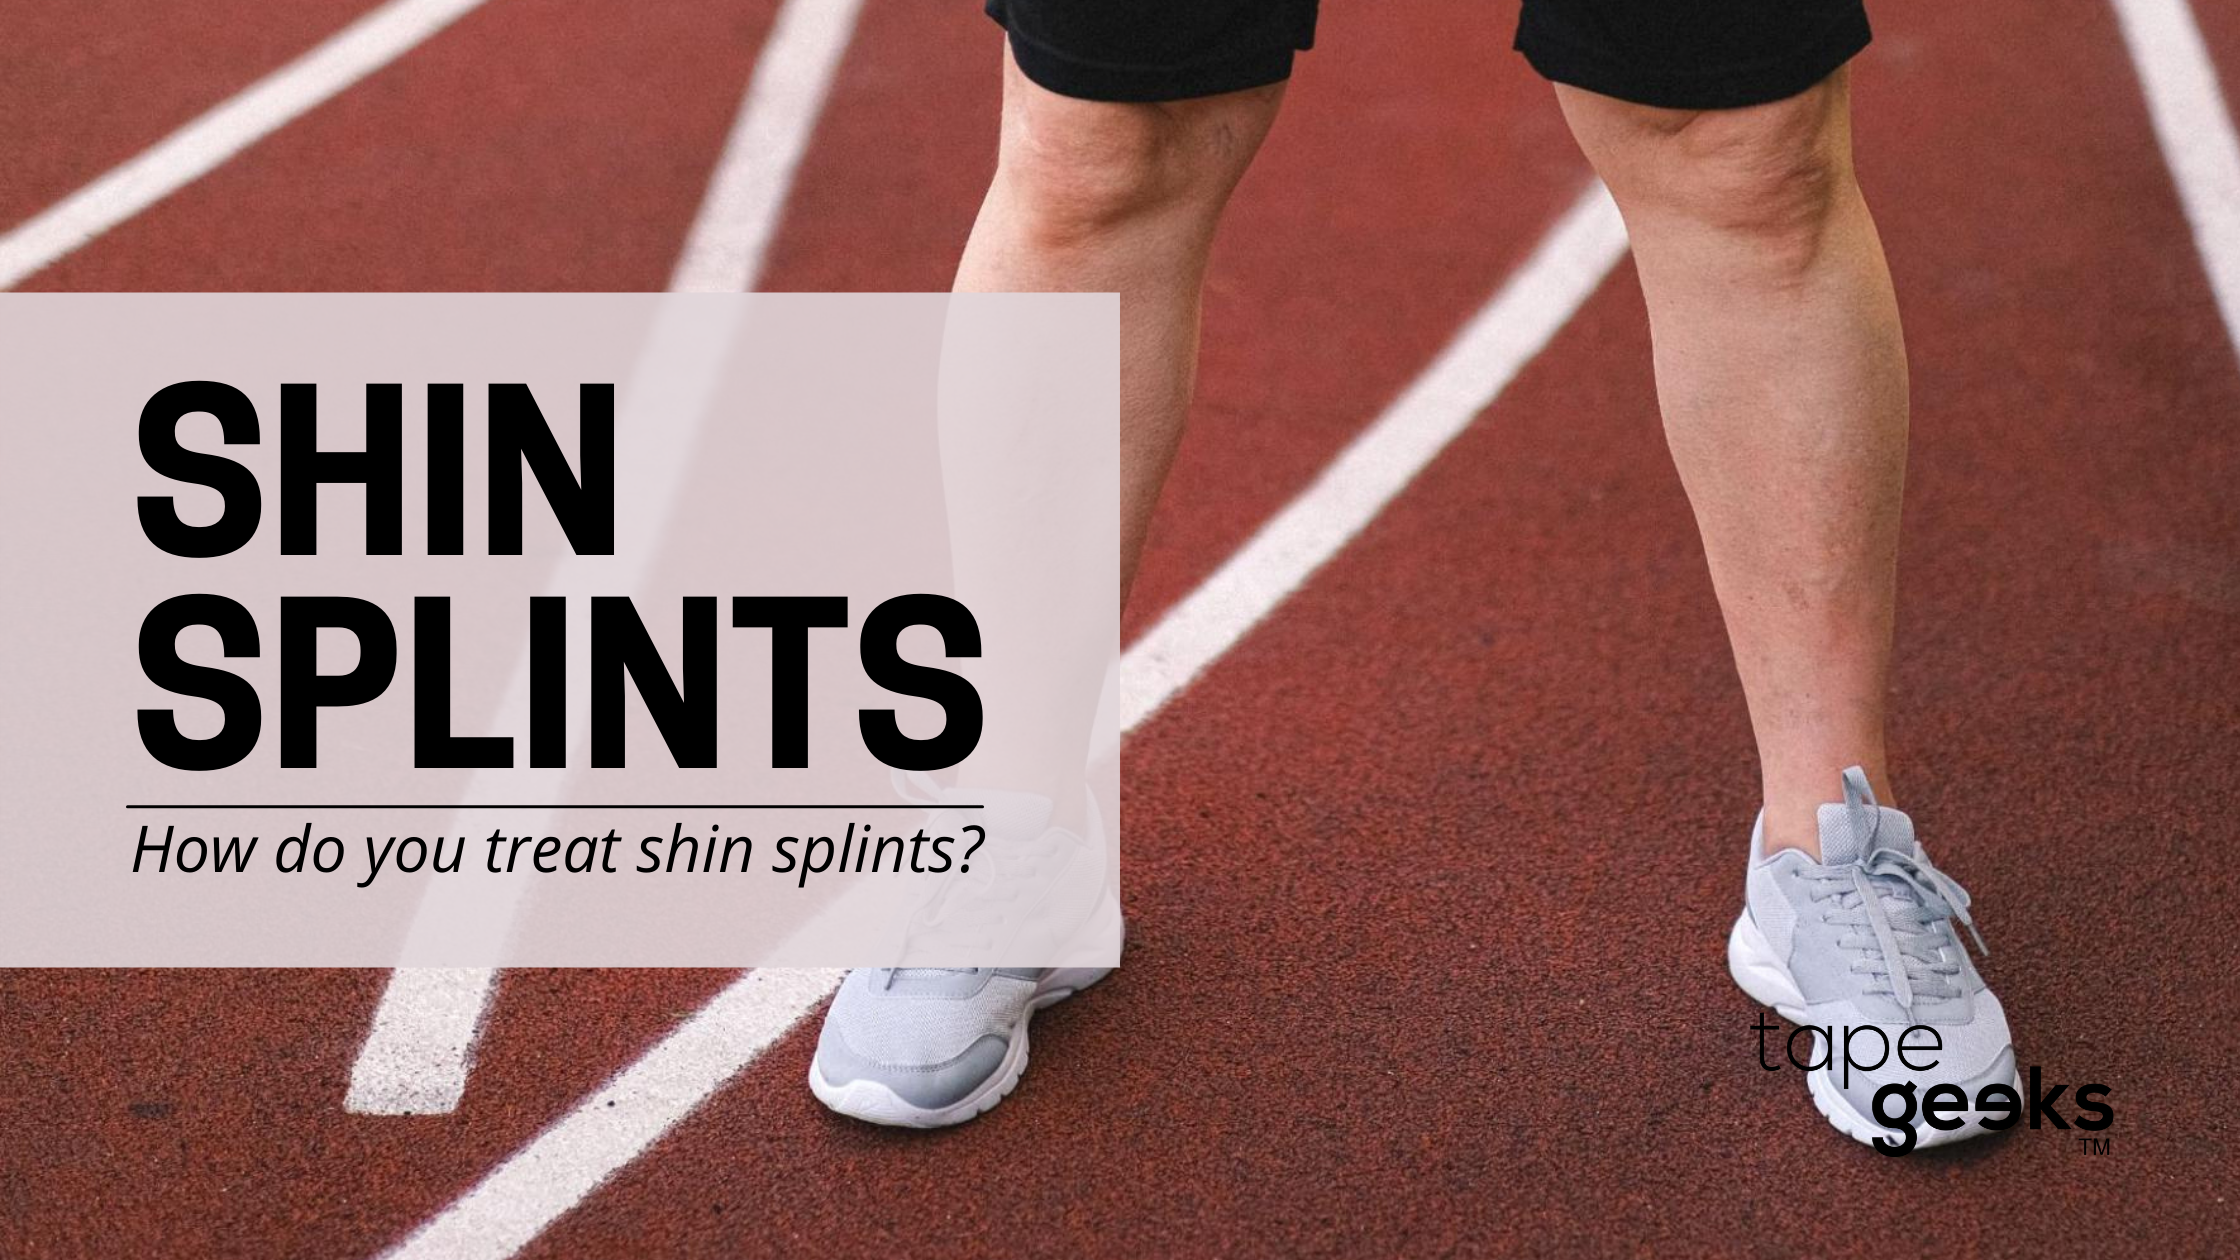 Taping Shin Splints: Instructions, Benefits, and More